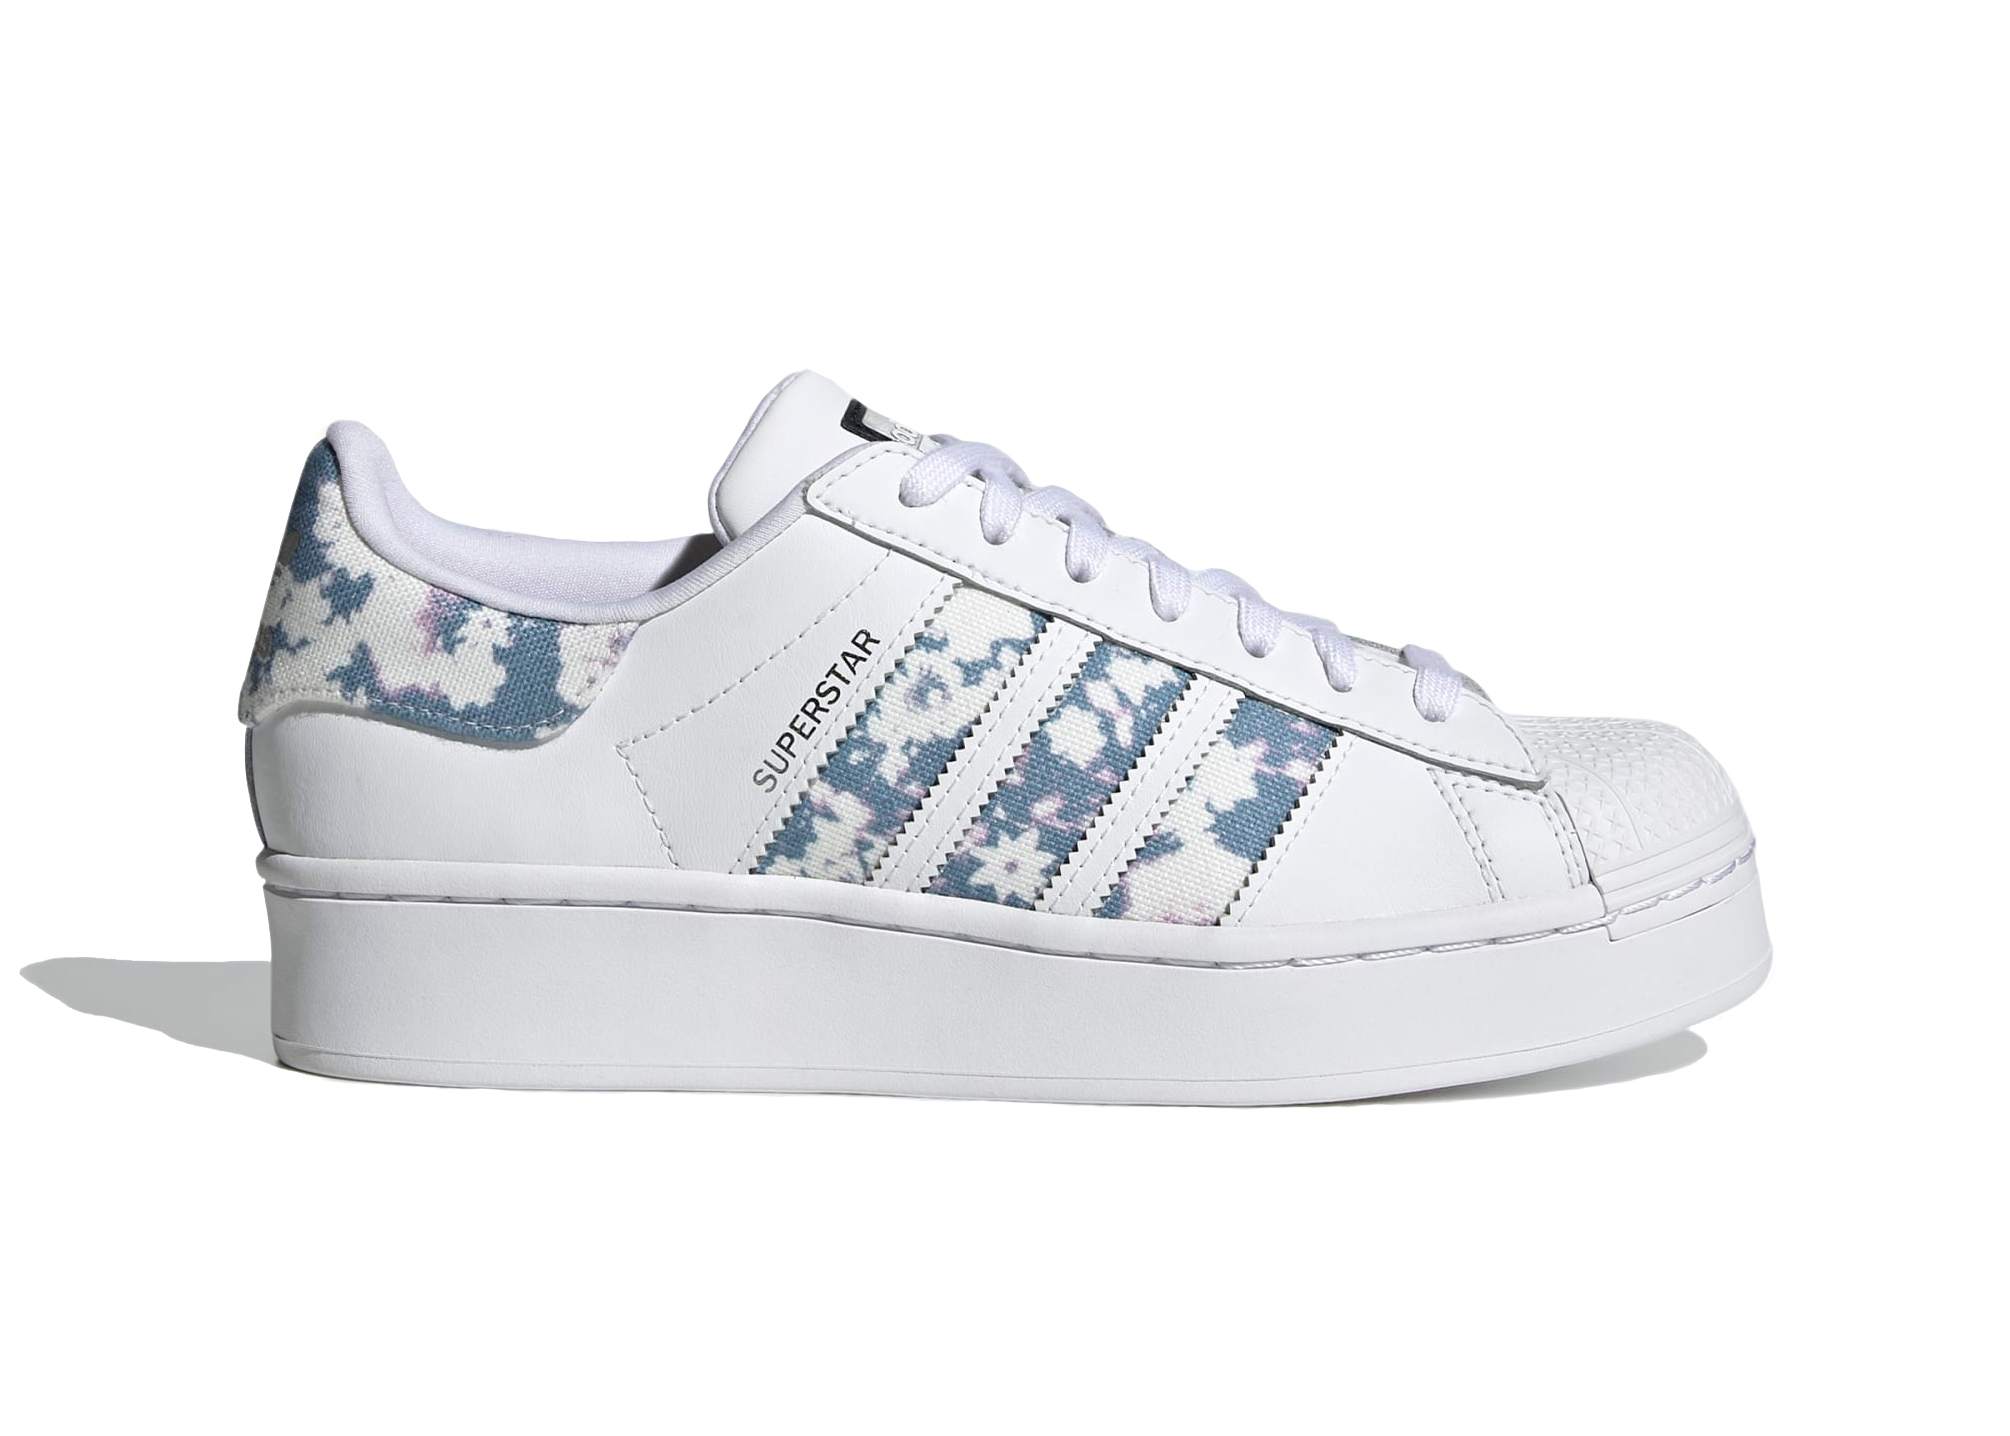 adidas Superstar Bold White Ambient Sky (Women's) - GZ8178 - US